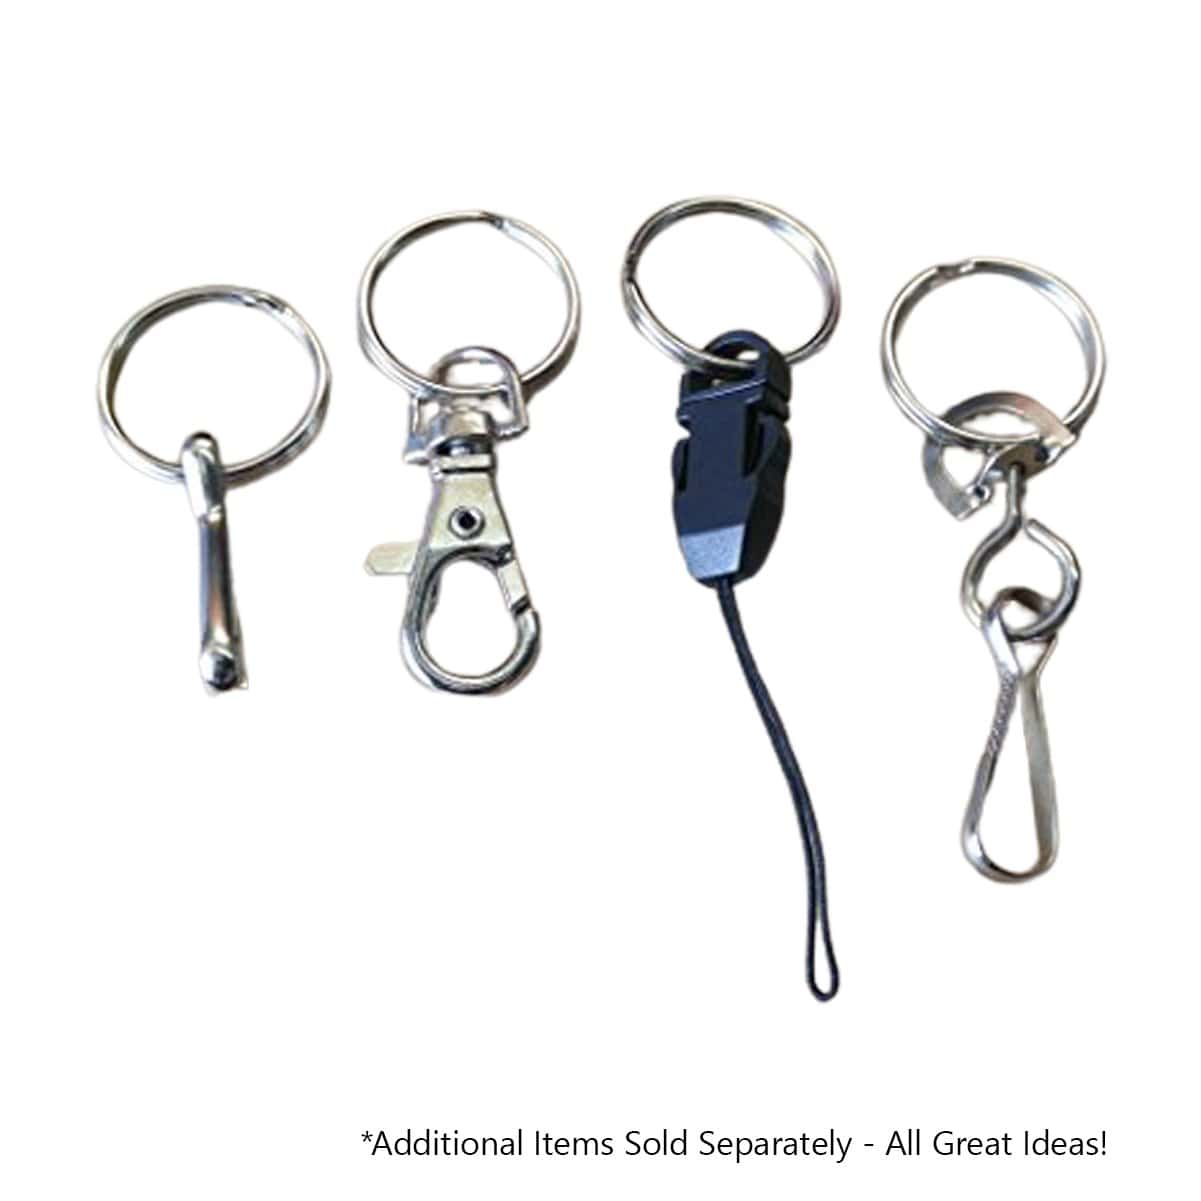 Key Ring Key Chain and Clasp Hook Black Key Chain Ring and Hook